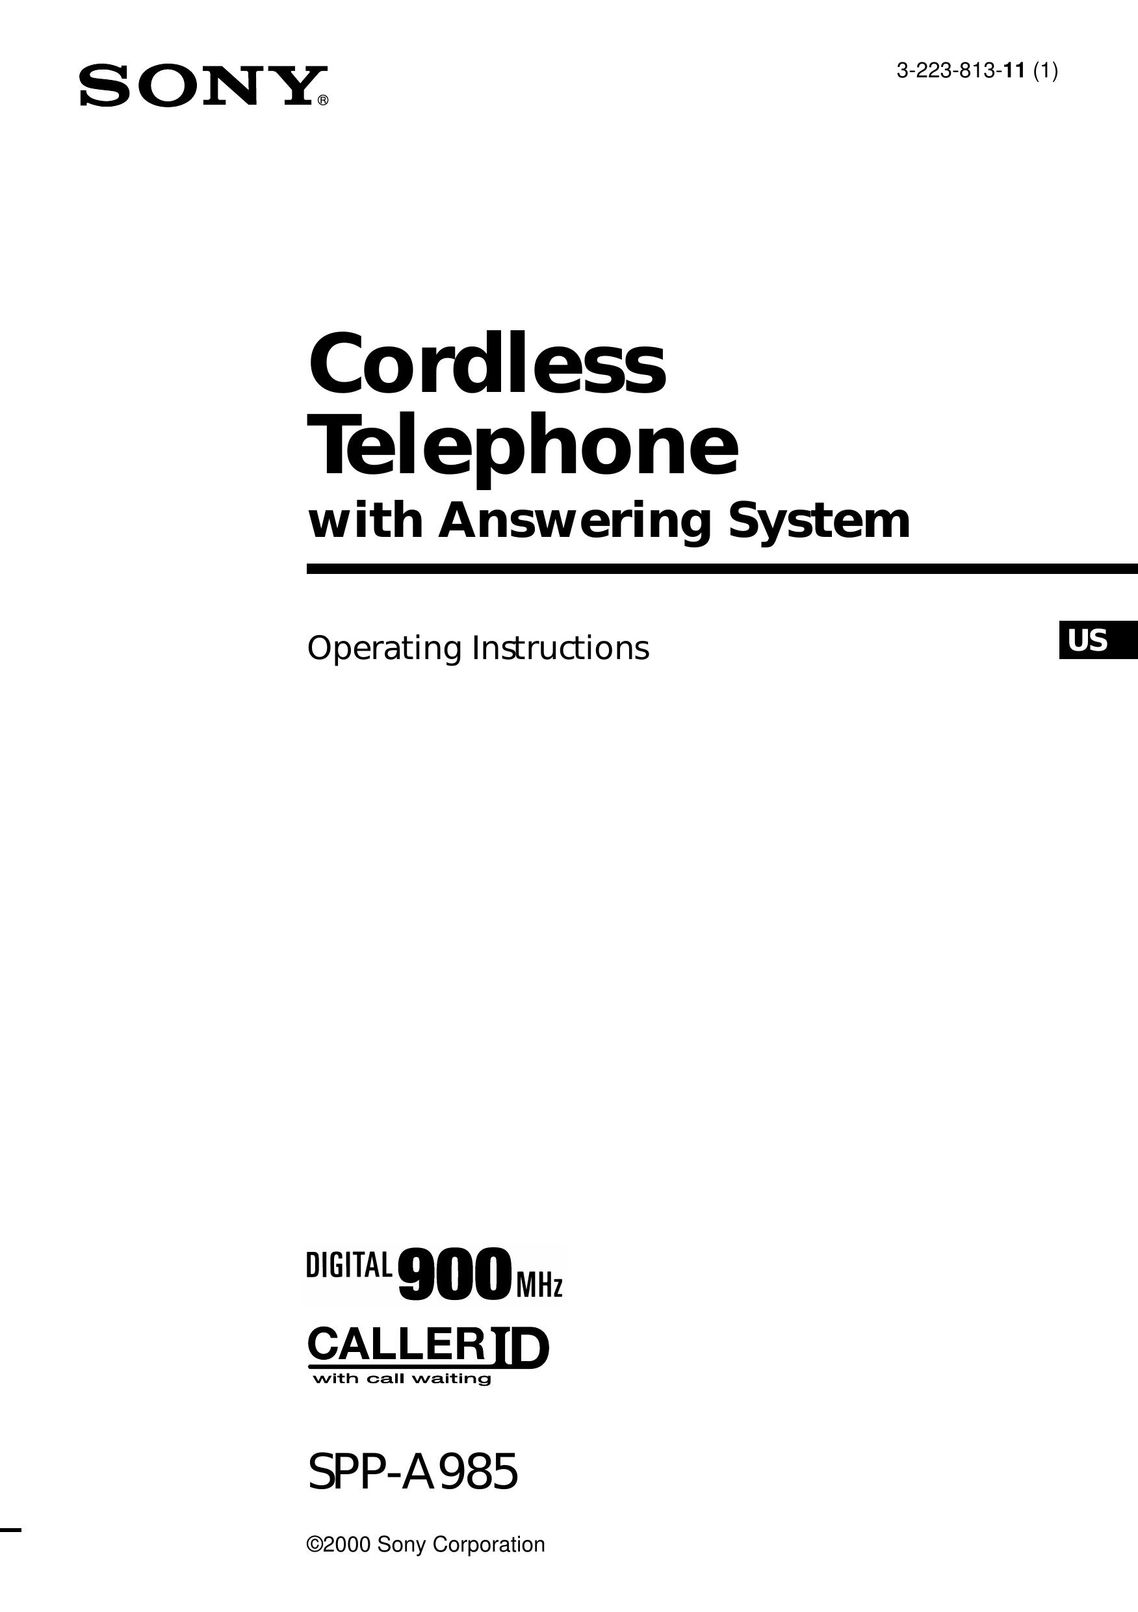 Sony SPP-A985 Cordless Telephone User Manual